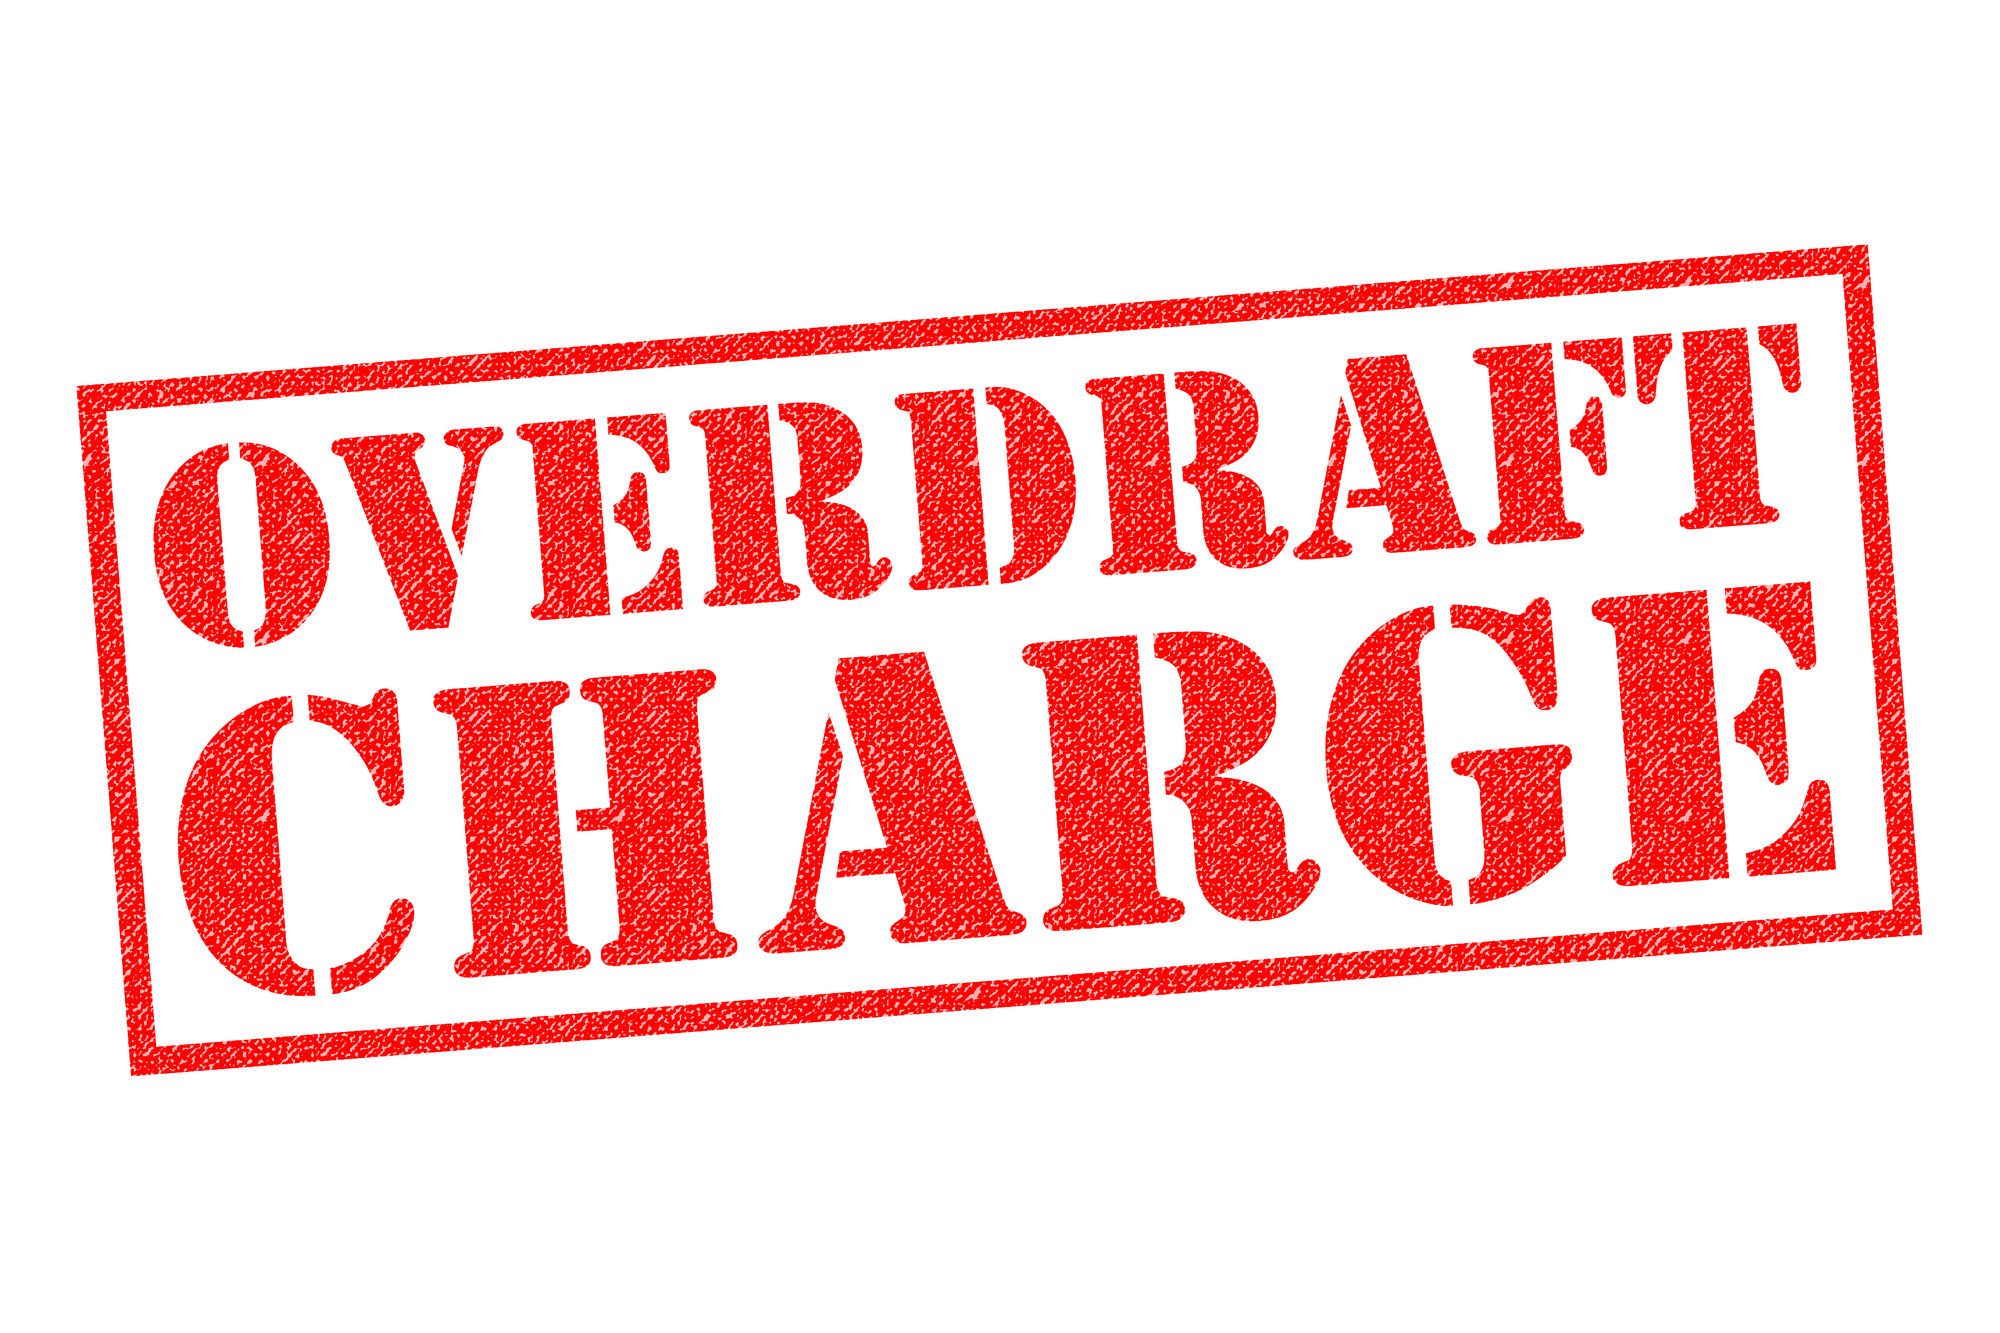 Overdraft fees that are charged by reordering the debit amounts may be an illegal practice.